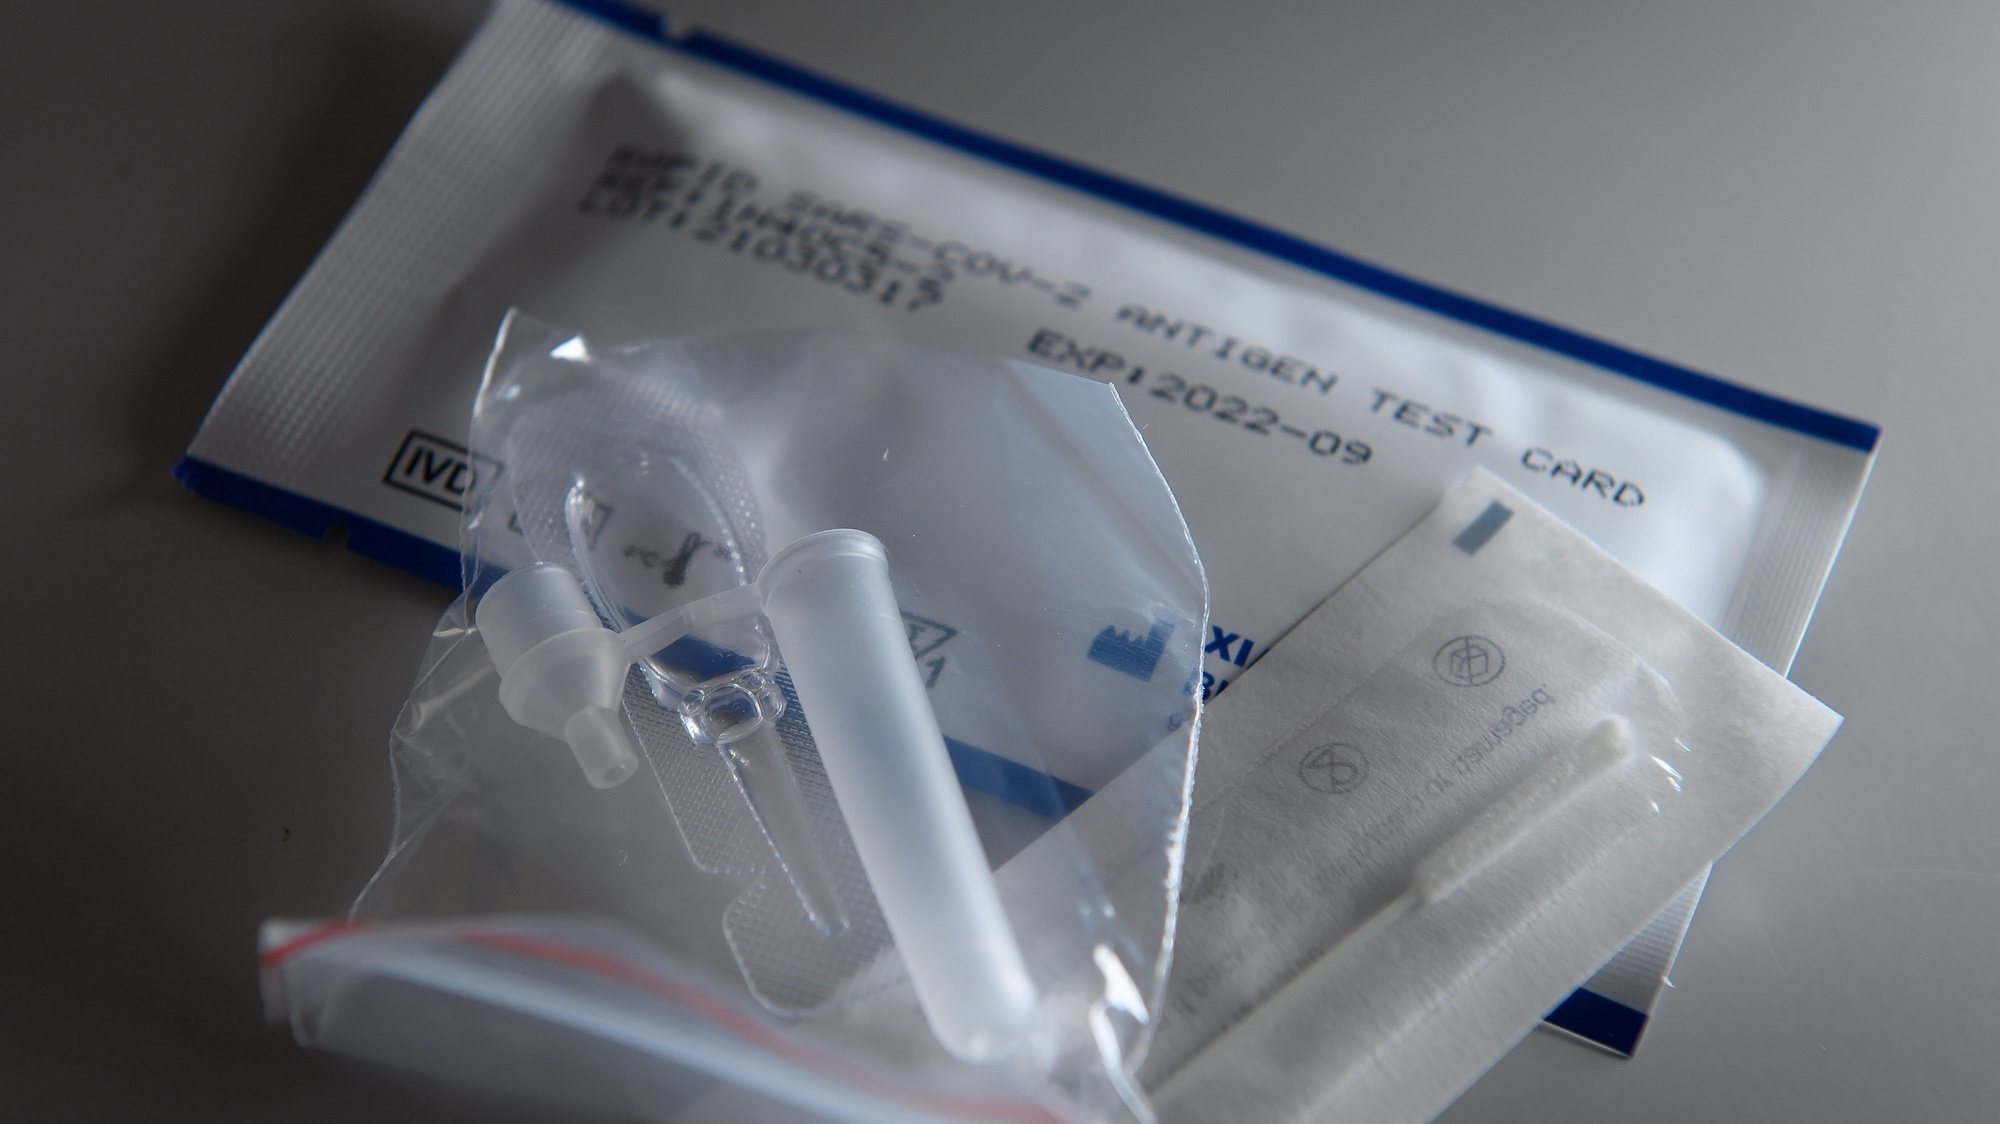 epa09099416 The contents of a COVID-19 rapid antigene self-test kit are seen in Garmisch-Partenkirchen, Germany, 26 March 2021. The widespread and regular use of self-tests is believed to be a key element to re-establish everyday life amid the ongoing pandemic of the COVID-19 disease caused by the SARS-CoV-2 coronavirus.  EPA/PHILIPP GUELLAND